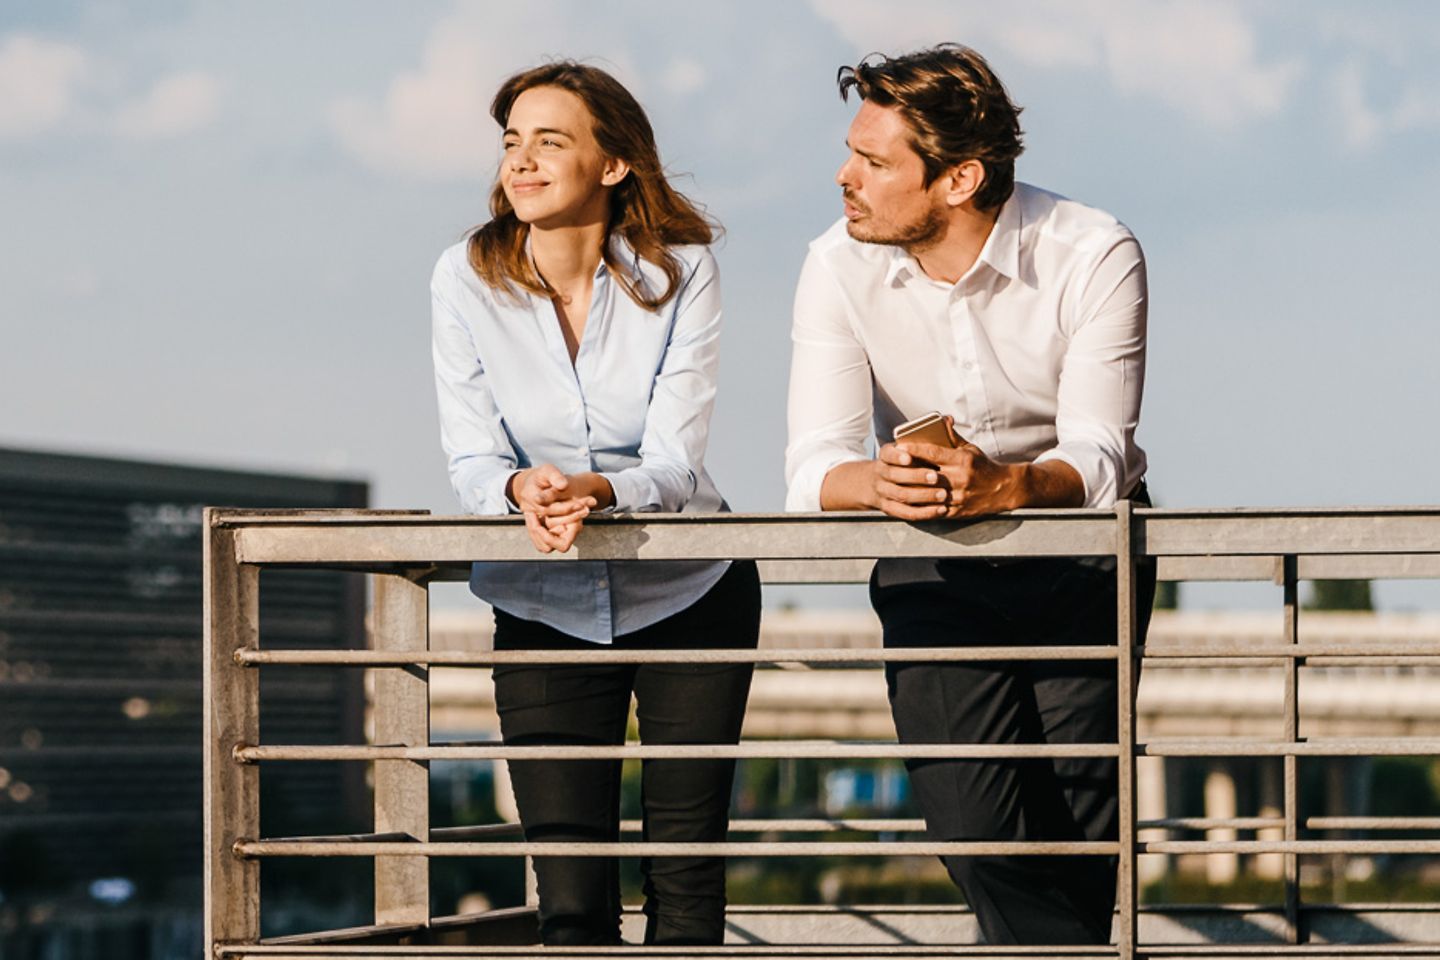 A man and a woman lean against a railing and look over a city